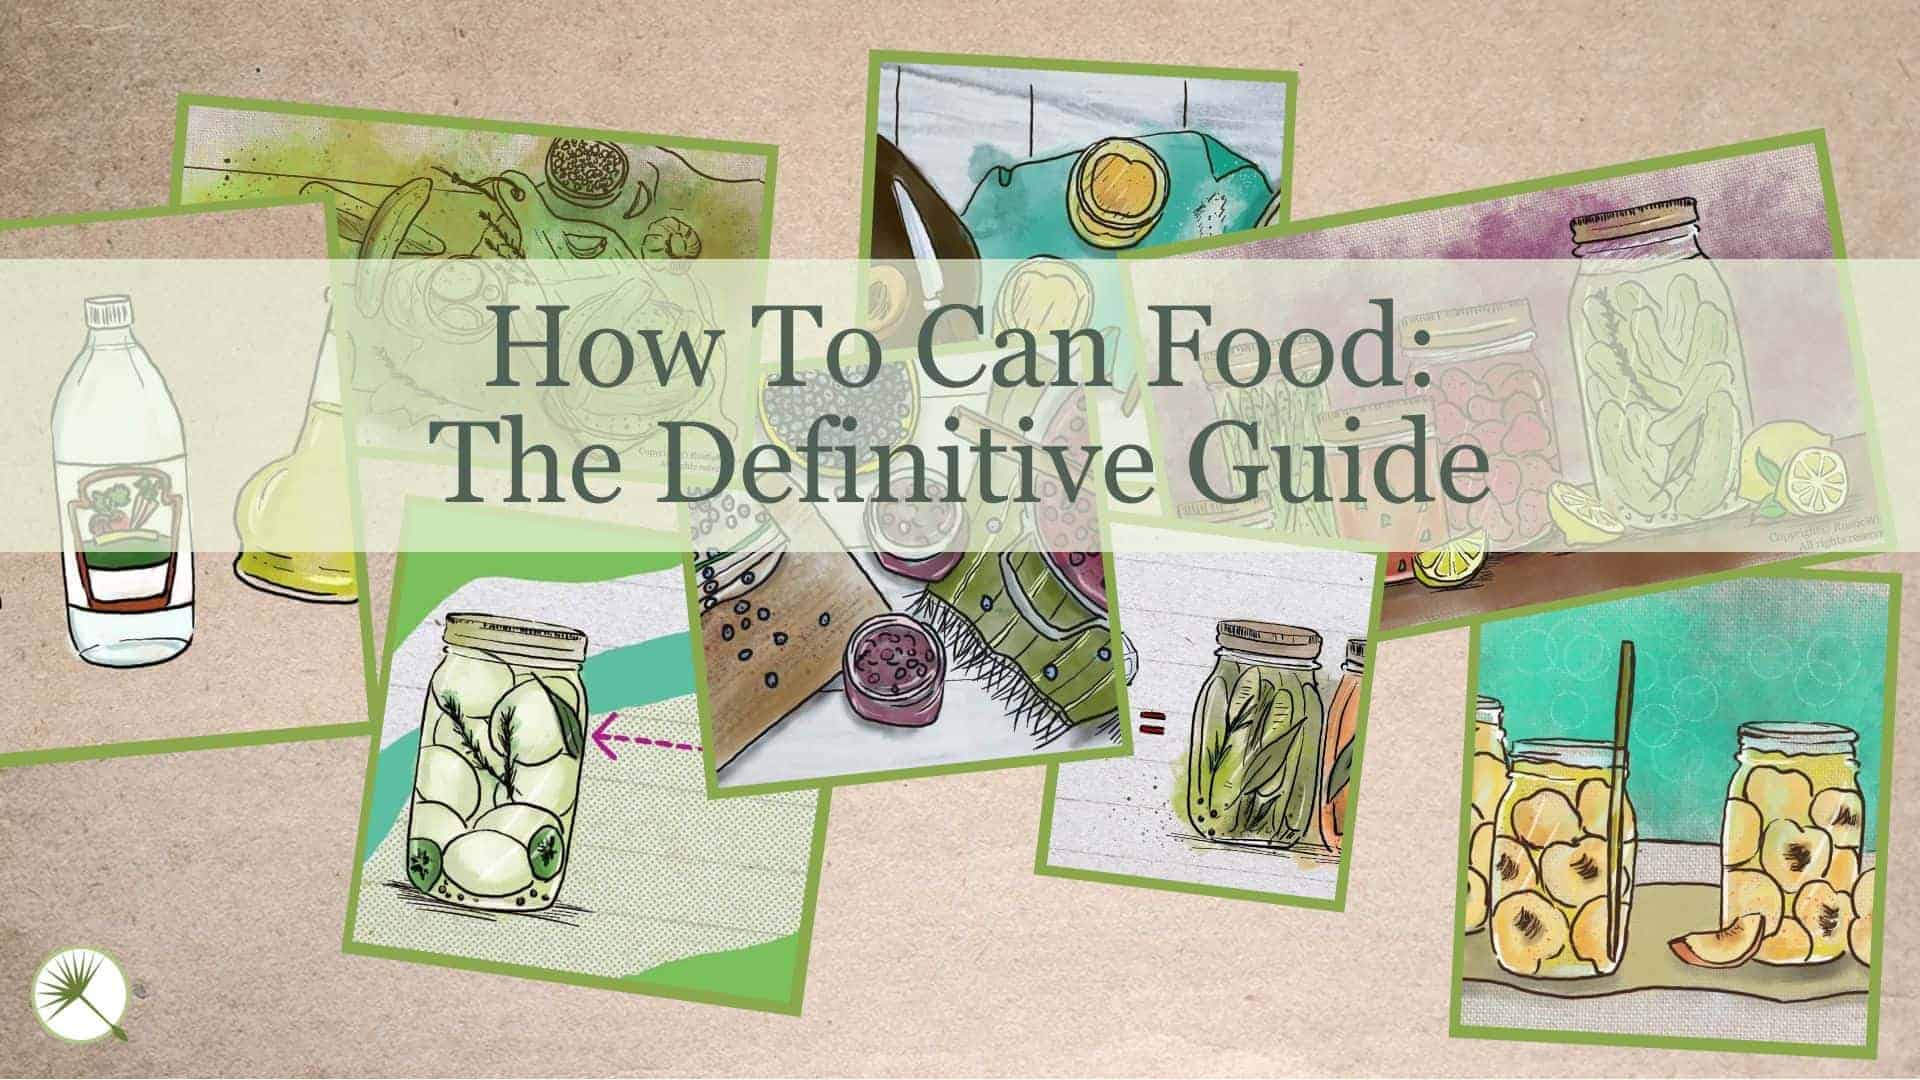 RusticWise - How To Can Food